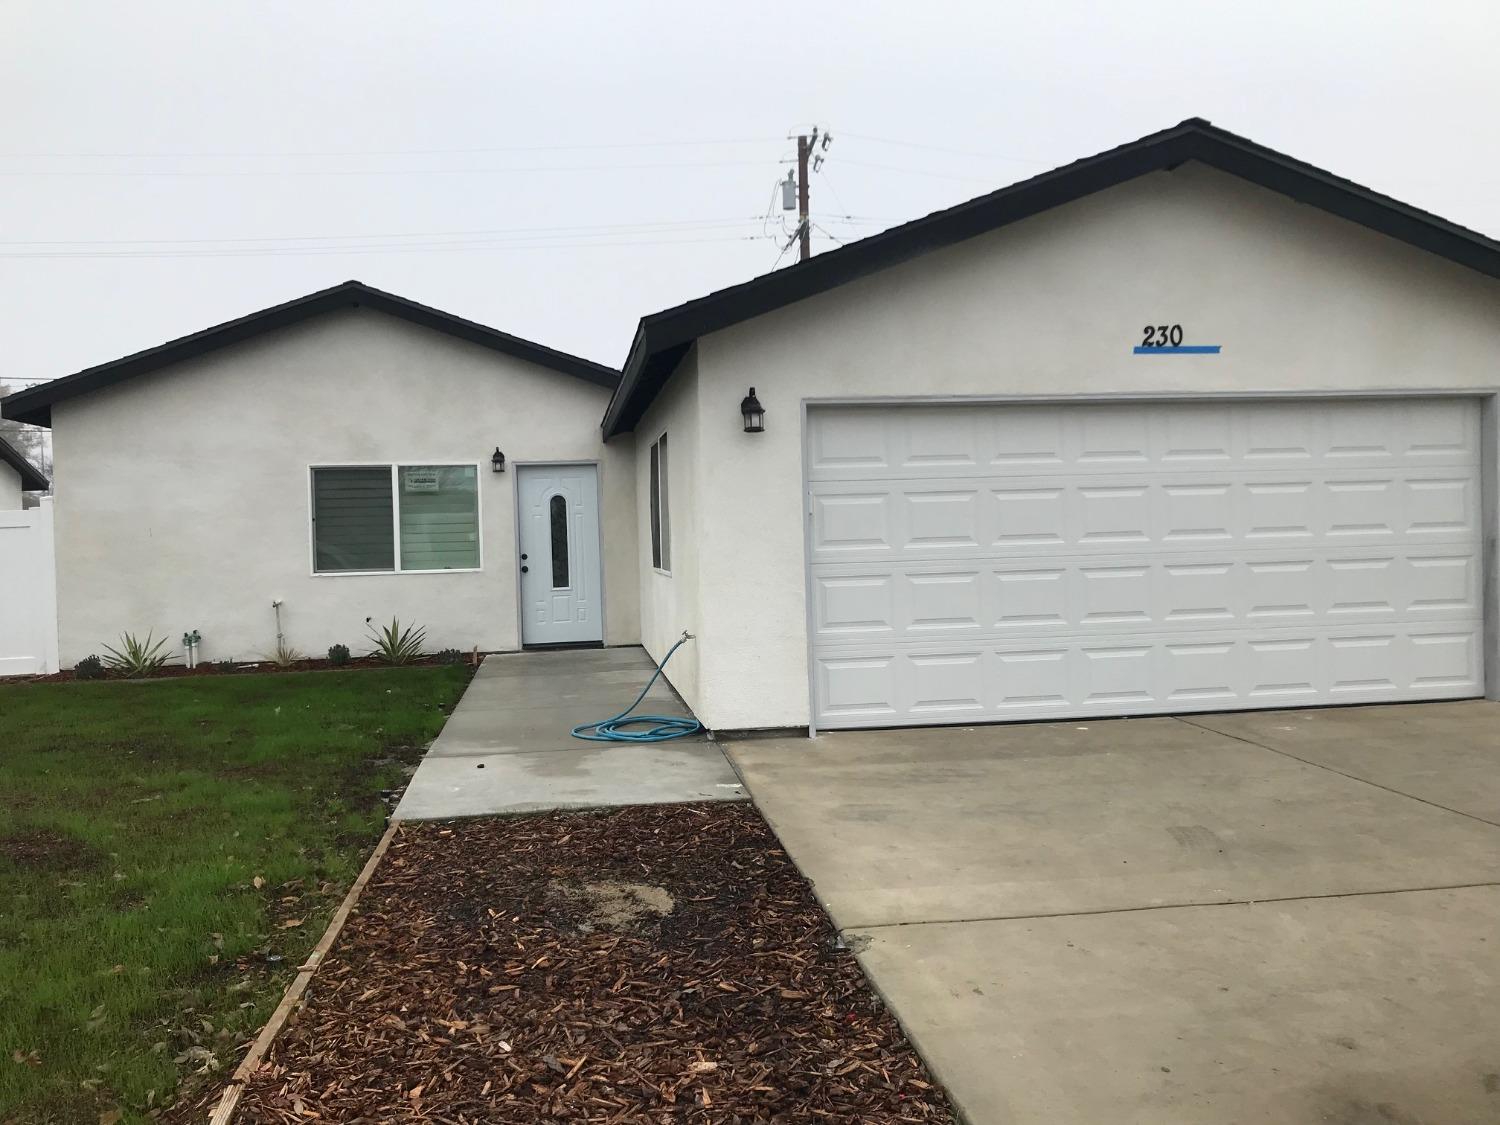 Photo of 2311 Patterson Ave in Corcoran, CA